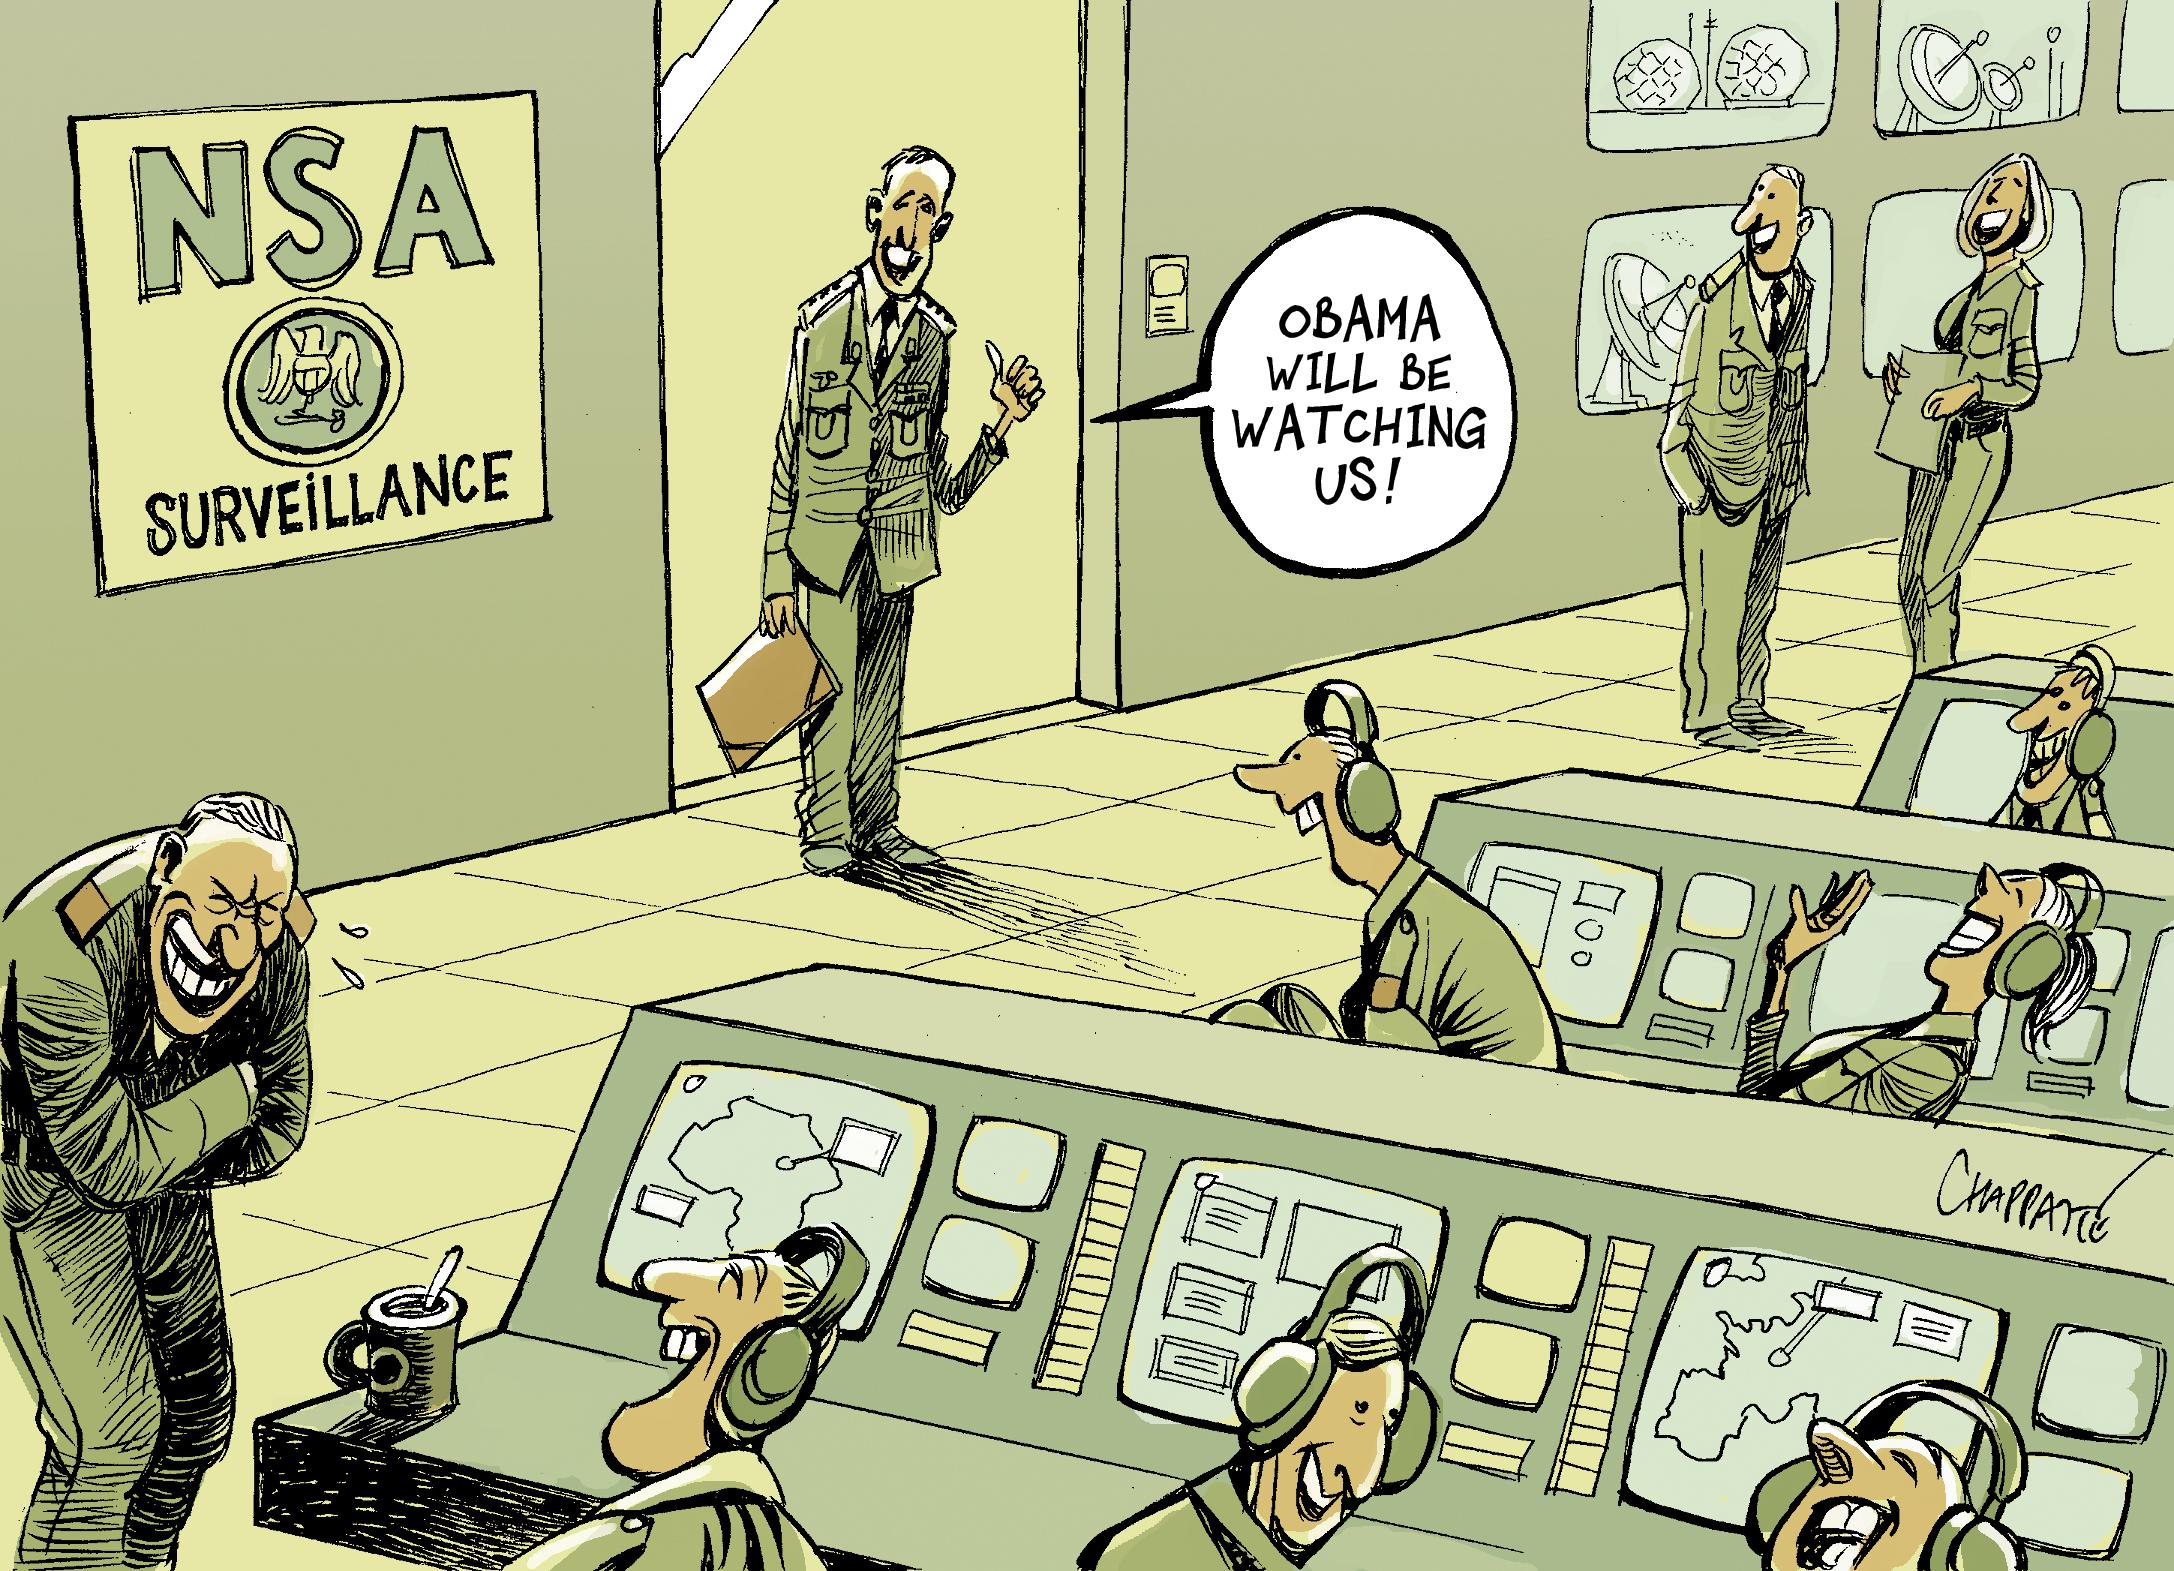 New rules for the NSA